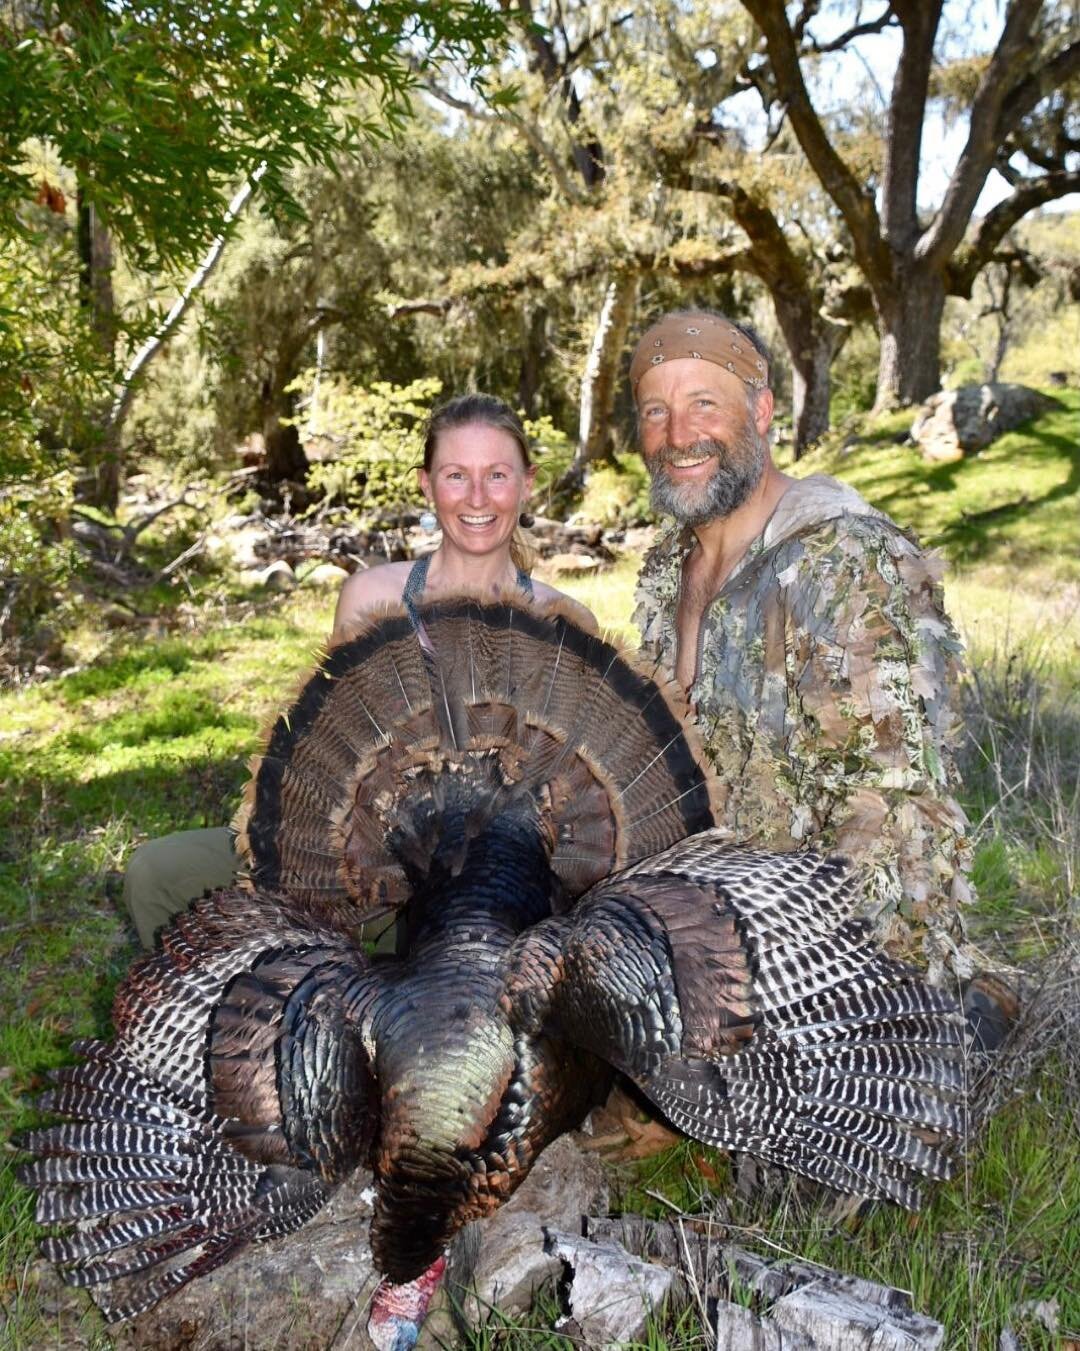 Super proud of this gal!  A year ago we were bowhunting in CA and she brought home her 1st archery gobbler&hellip;..so fun to watch him come in and strut his stuff -truly one of the best hunts on the planet!!
#badasswoman #supermom #nwtf #huntingturk